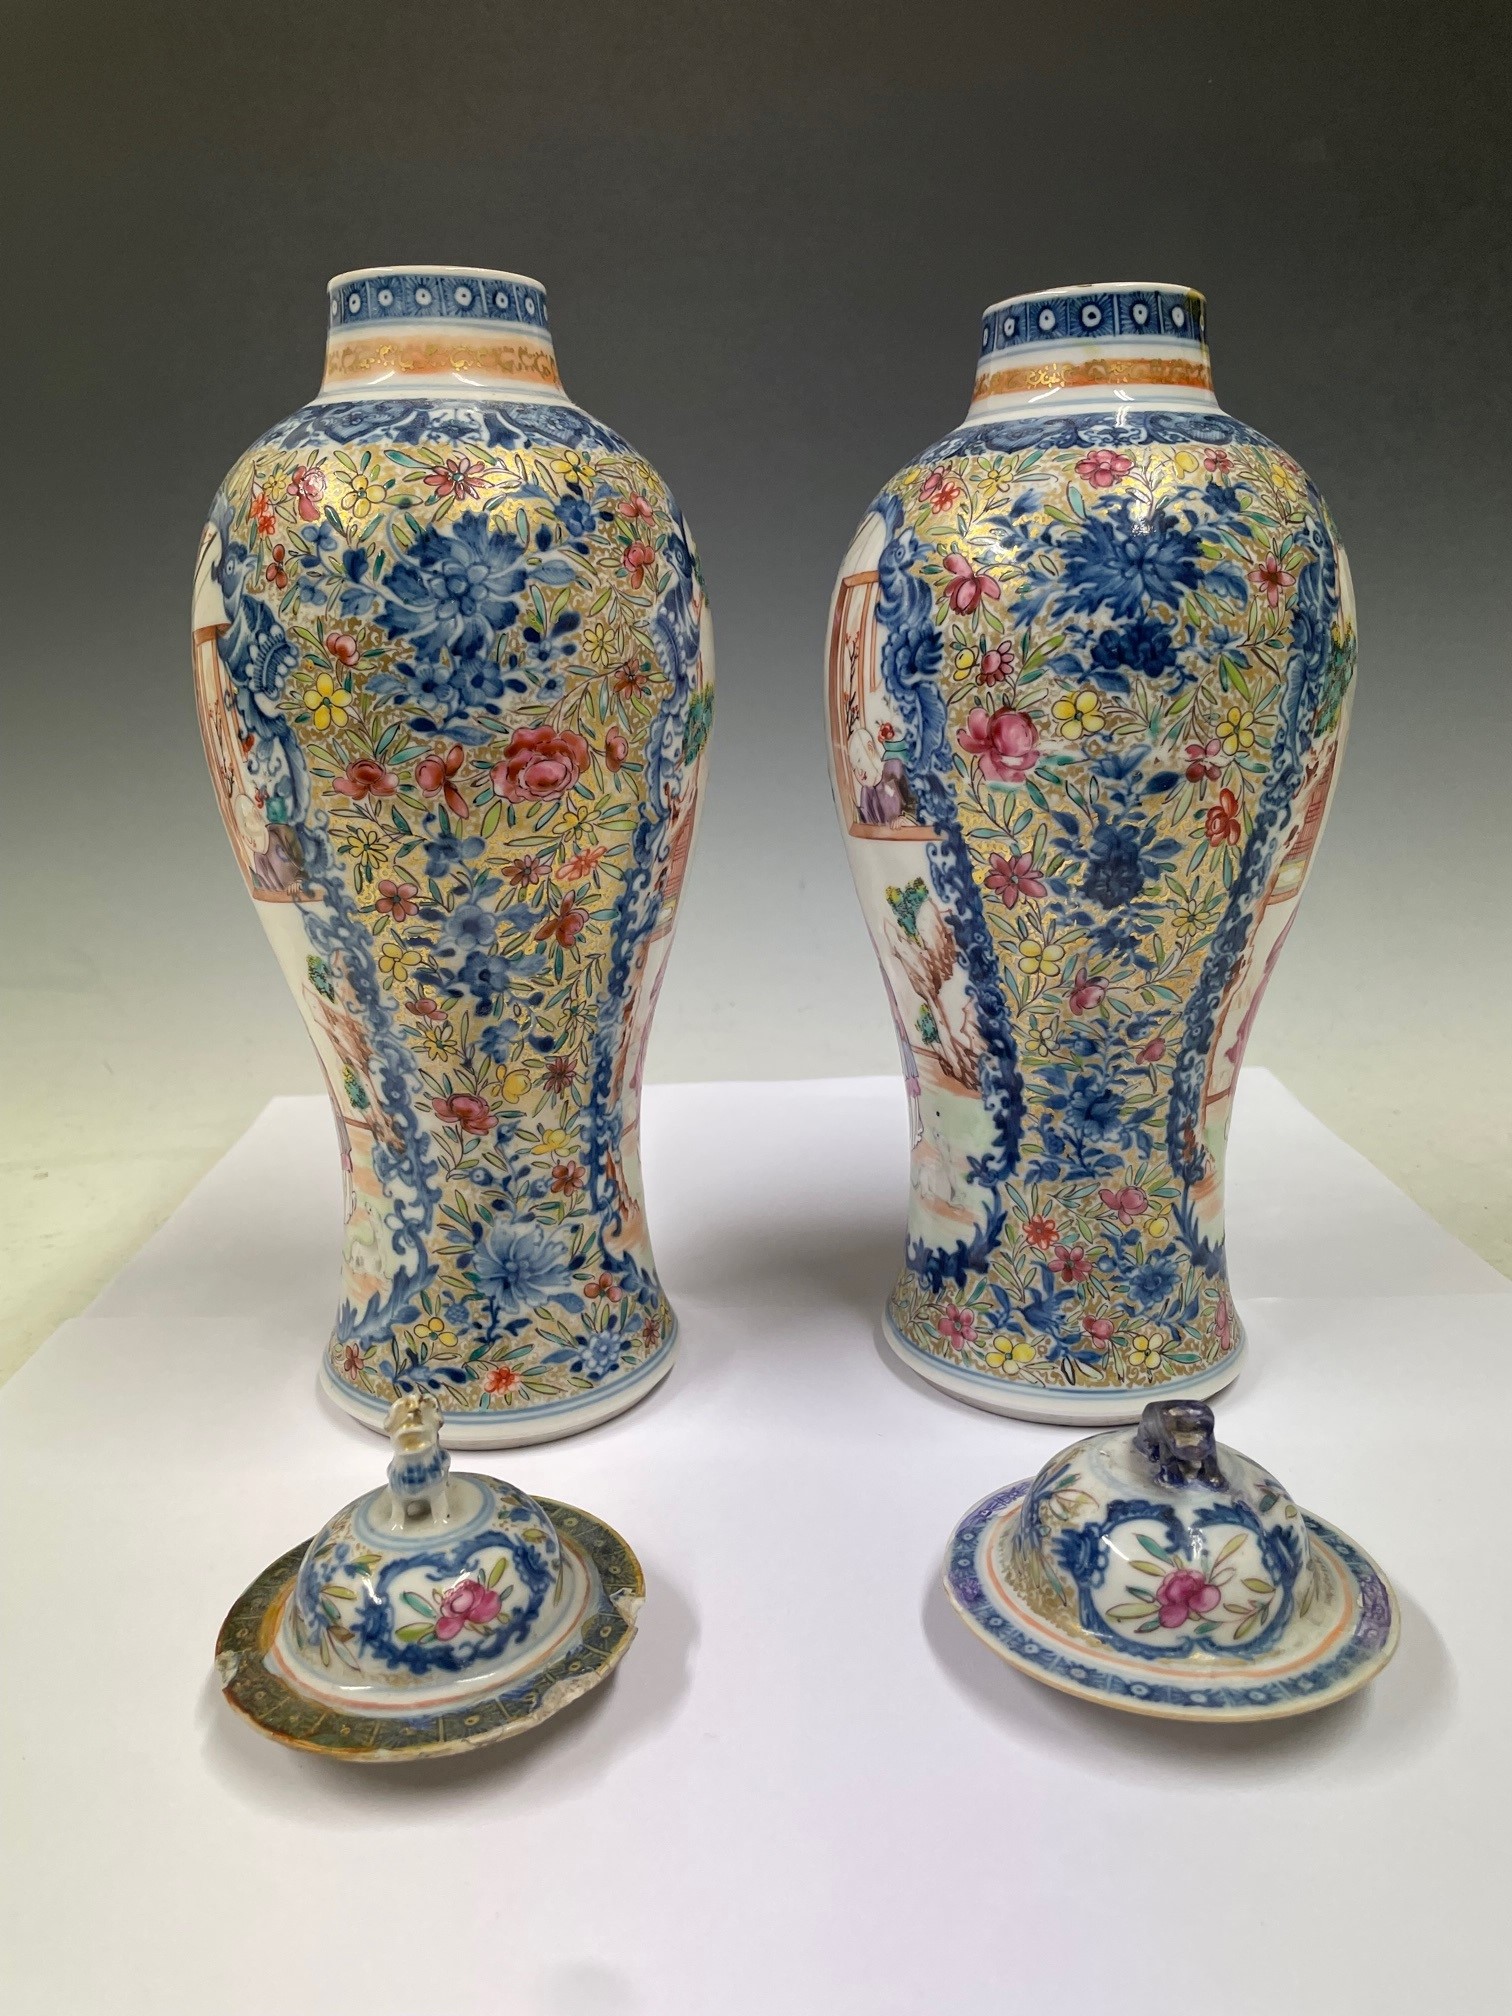 A PAIR OF CHINESE PORCELAIN BLUE AND WHITE JARS AND COVERS, QING DYNASTY, WITH FAMILLE ROSE ENAMEL - Image 5 of 7